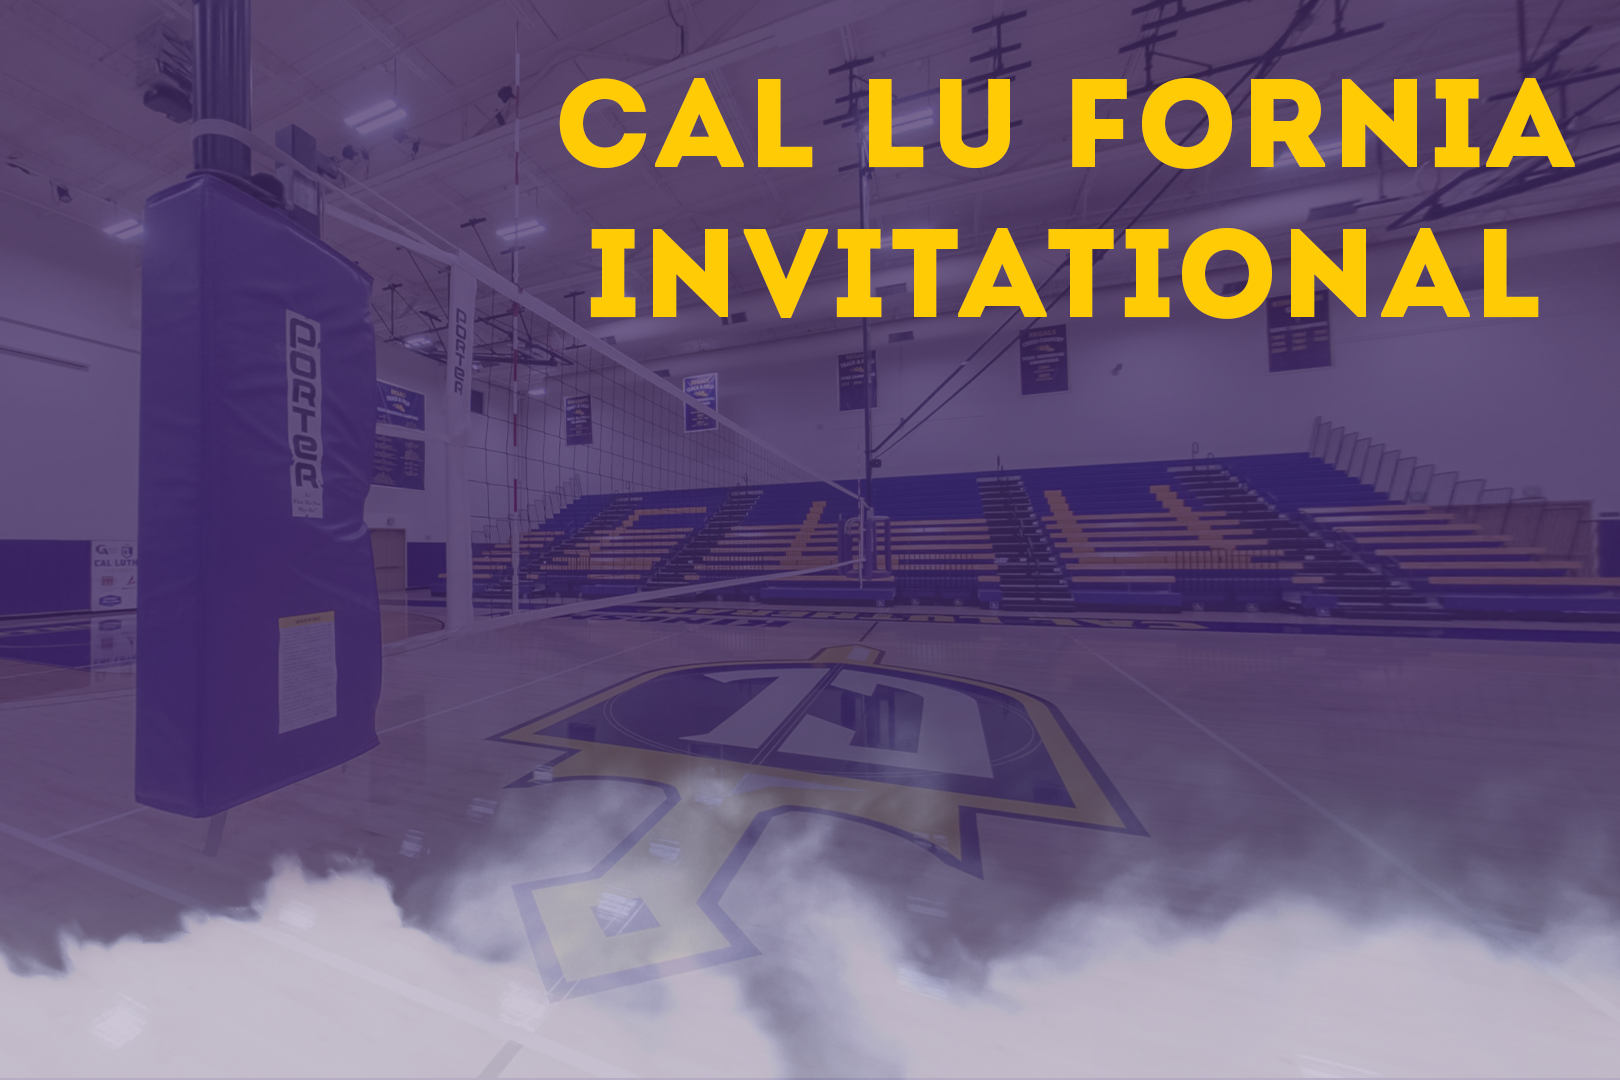 Regals Volleyball Hosting Cal Lu Fornia Invitational